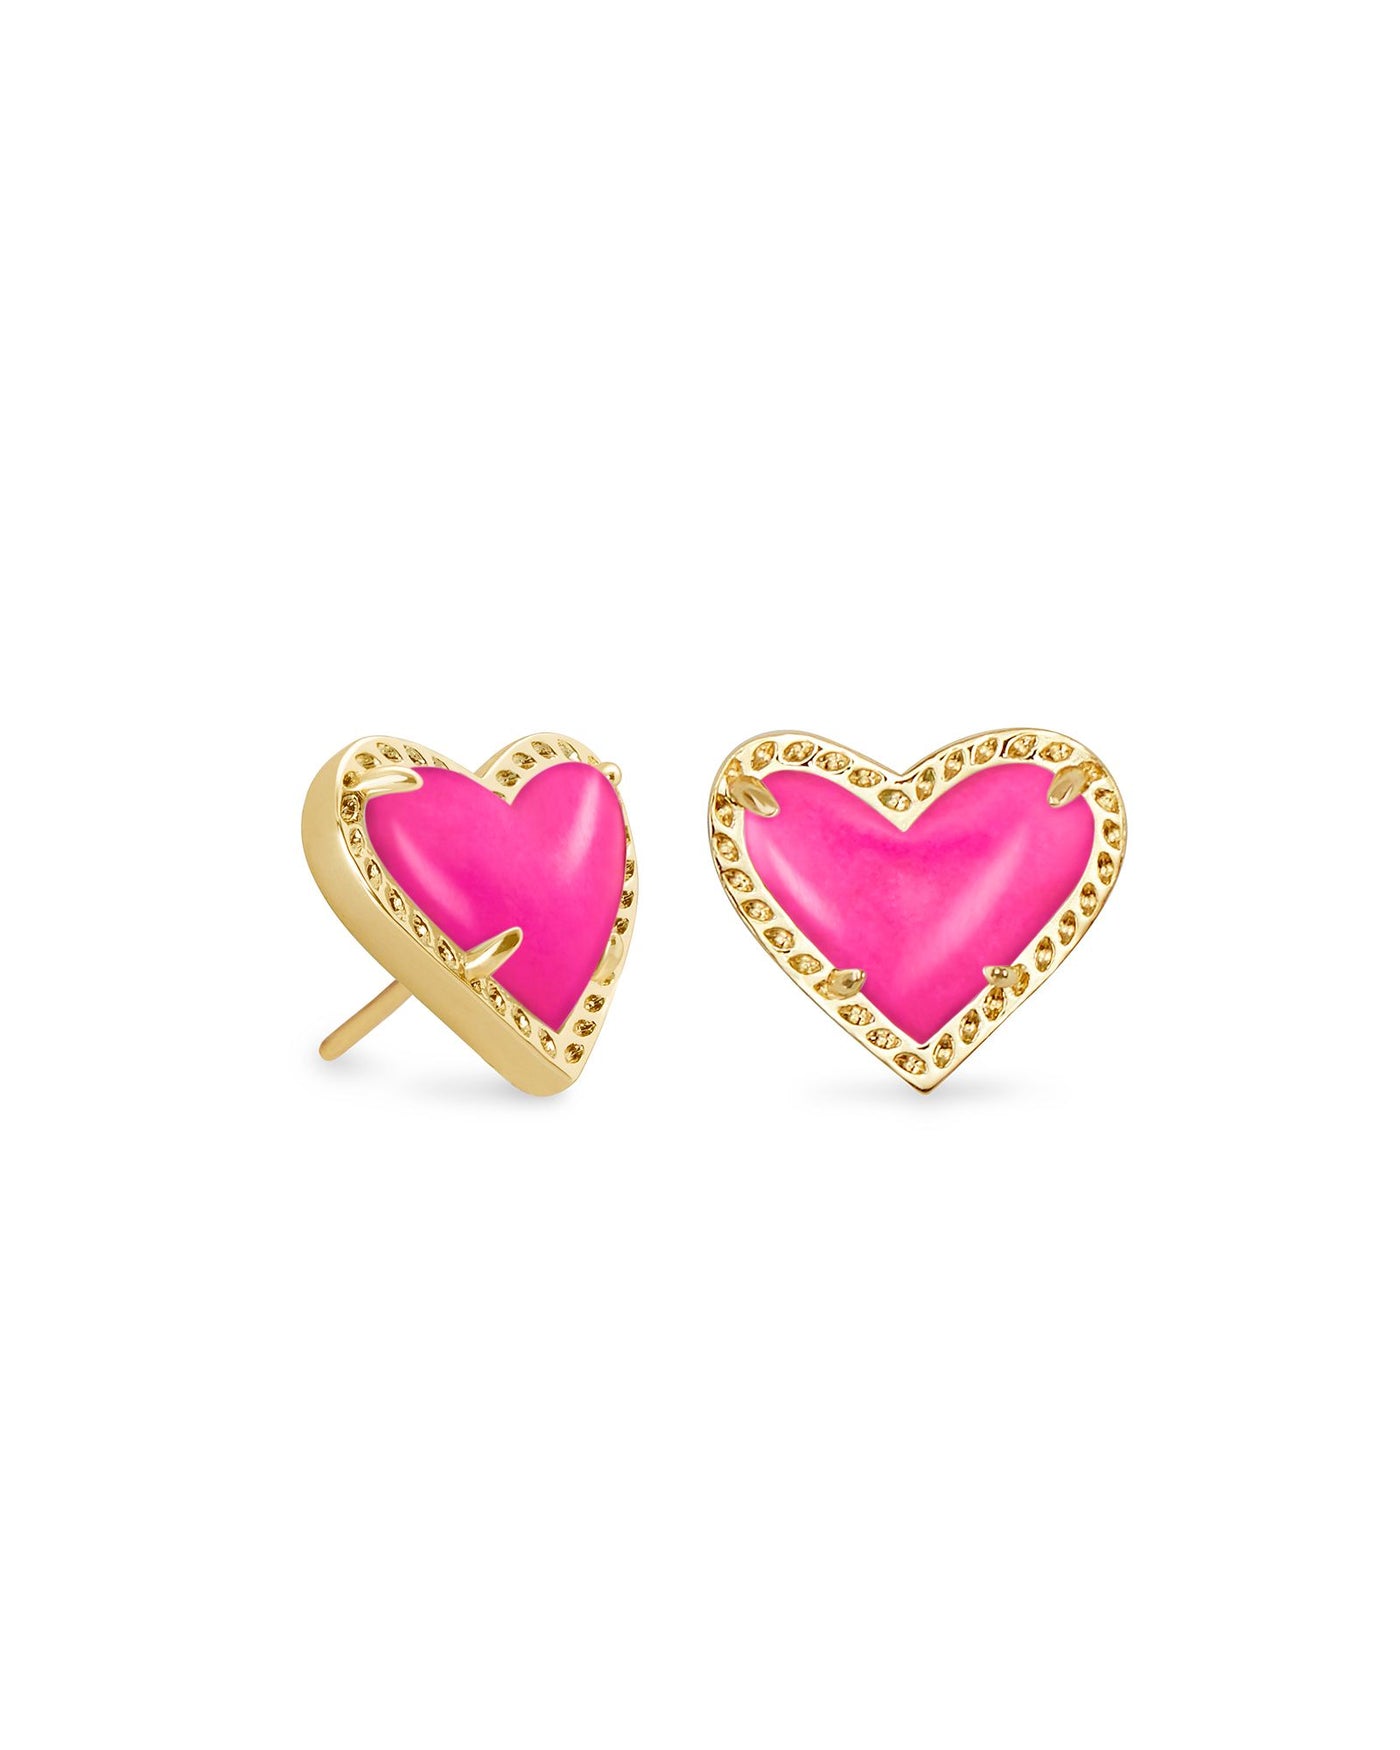 Ari Heart Stud Earrings Gold Magenta on white background, front view.